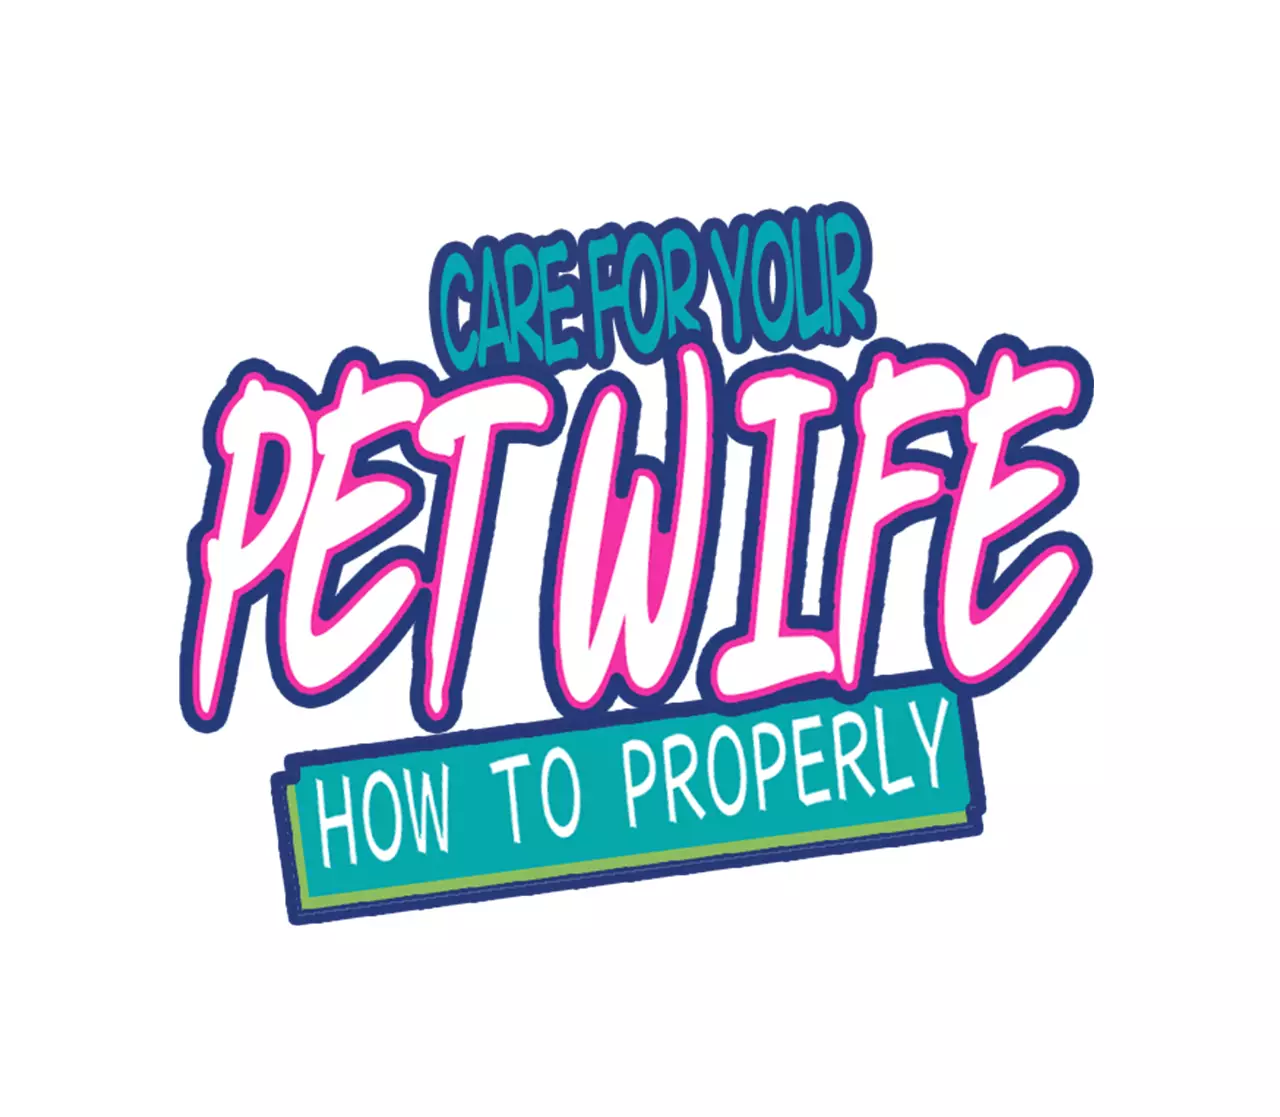 How To Properly Care For Your Pet Wife - 16 page 1